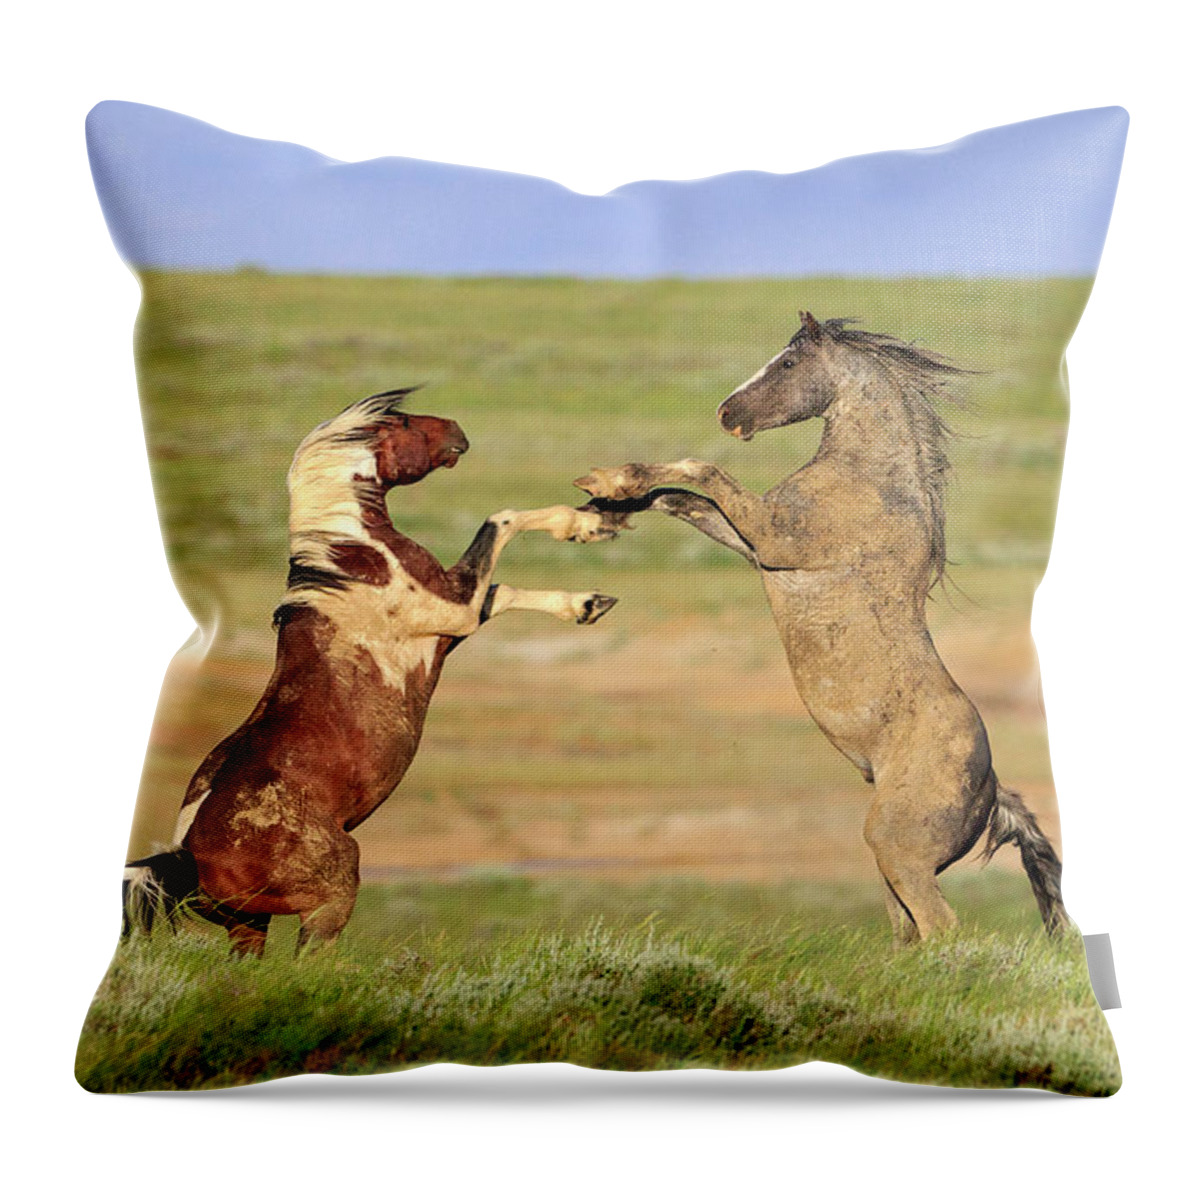 Wild Horses Throw Pillow featuring the photograph Settling Their Differences by Jack Bell